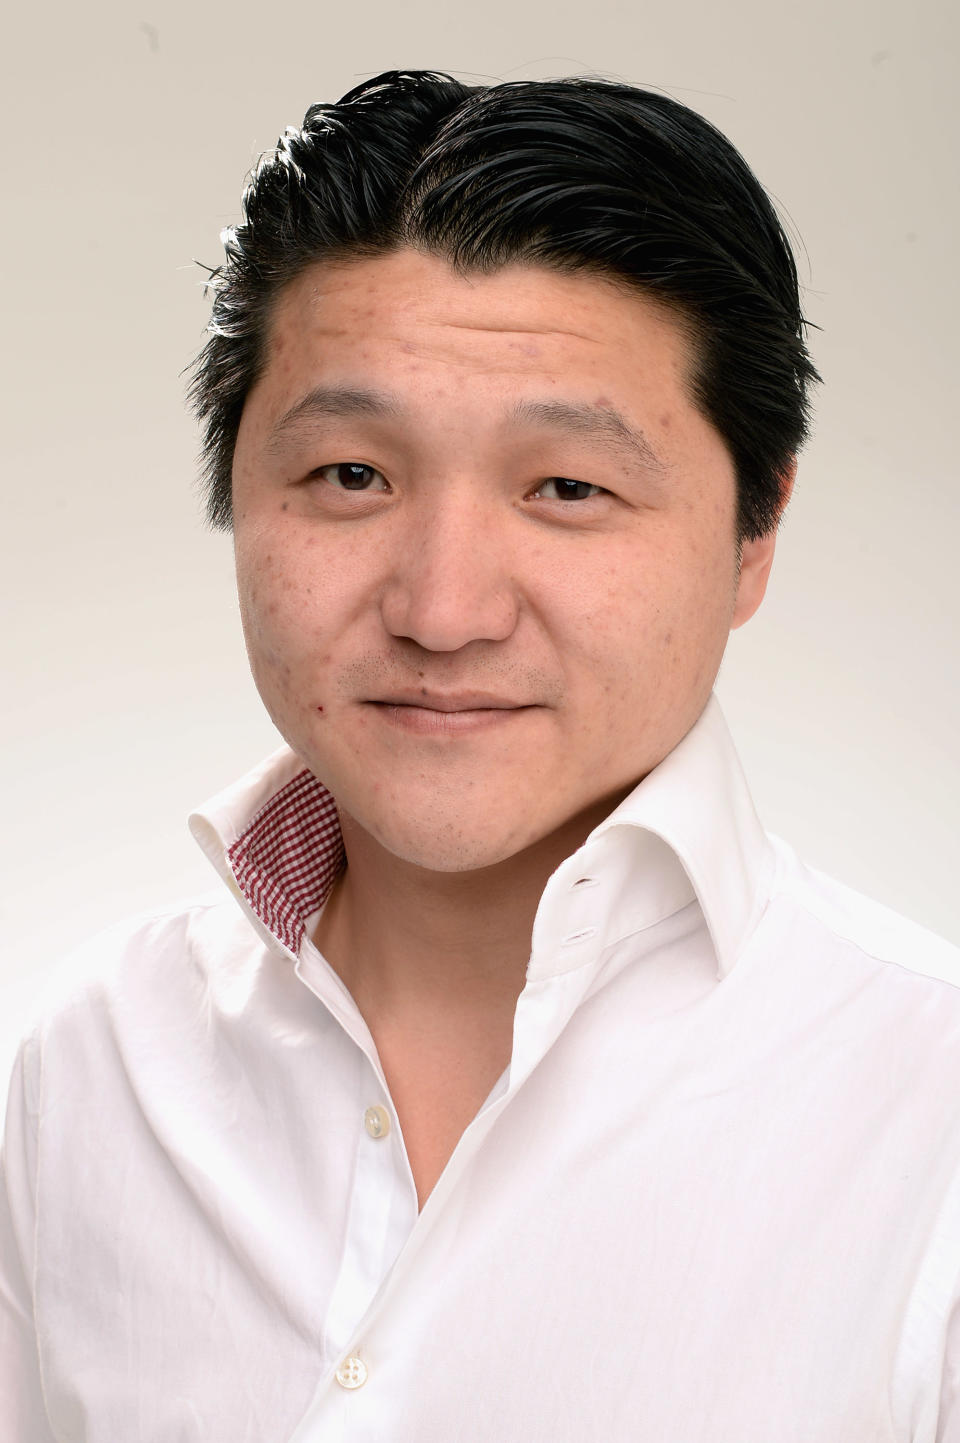 Producer In-Soo Radstake of the film "Raw Herring" poses at the Tribeca Film Festival 2013 portrait studio on April 21, 2013 in New York City.